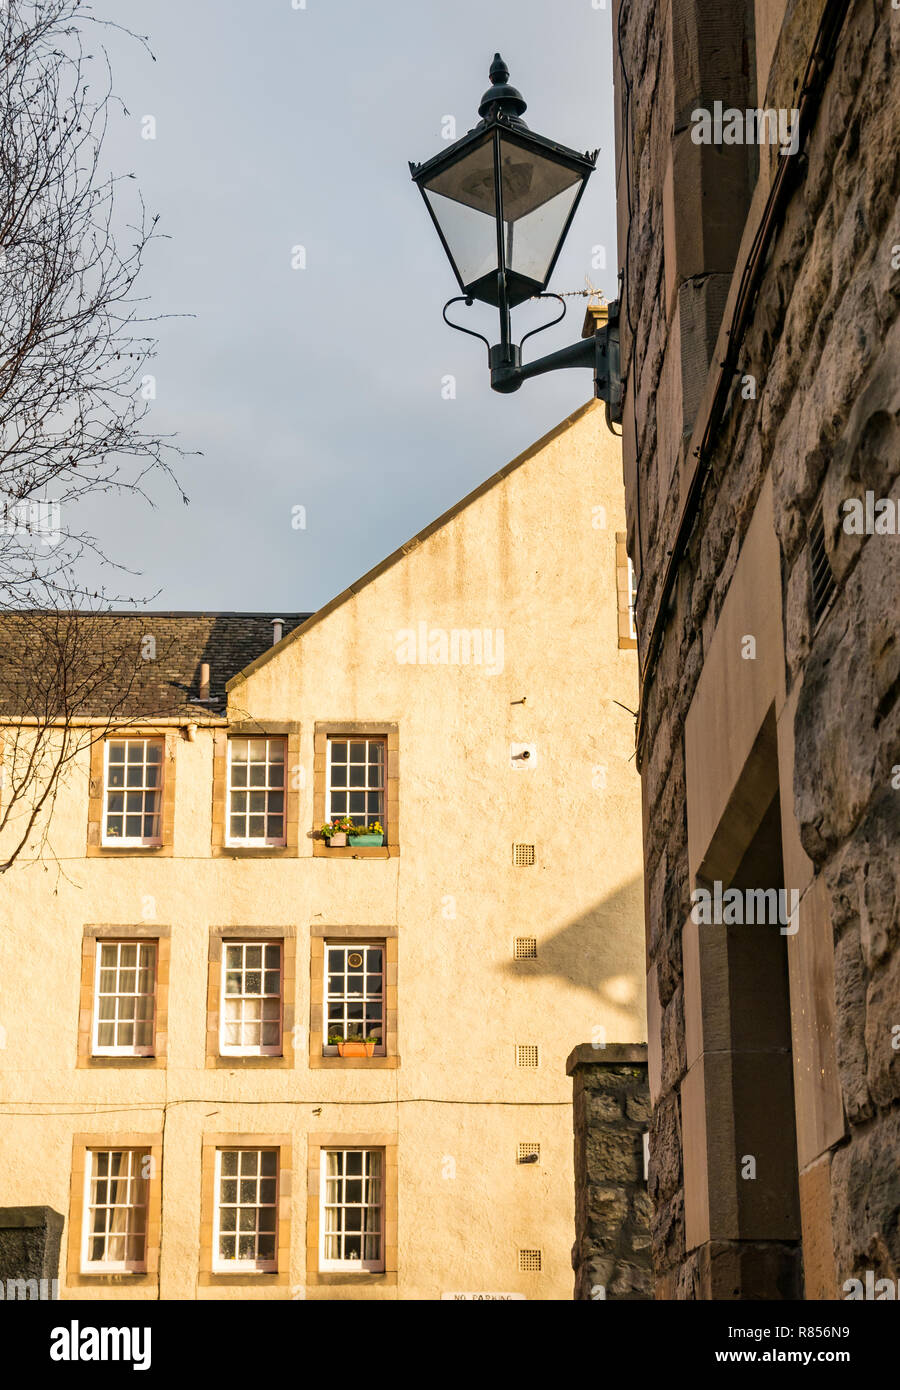 Edinburgh close or alley with old fashioned lamp post and tenement building with sash windows, Edinburgh, Scotland, UK Stock Photo